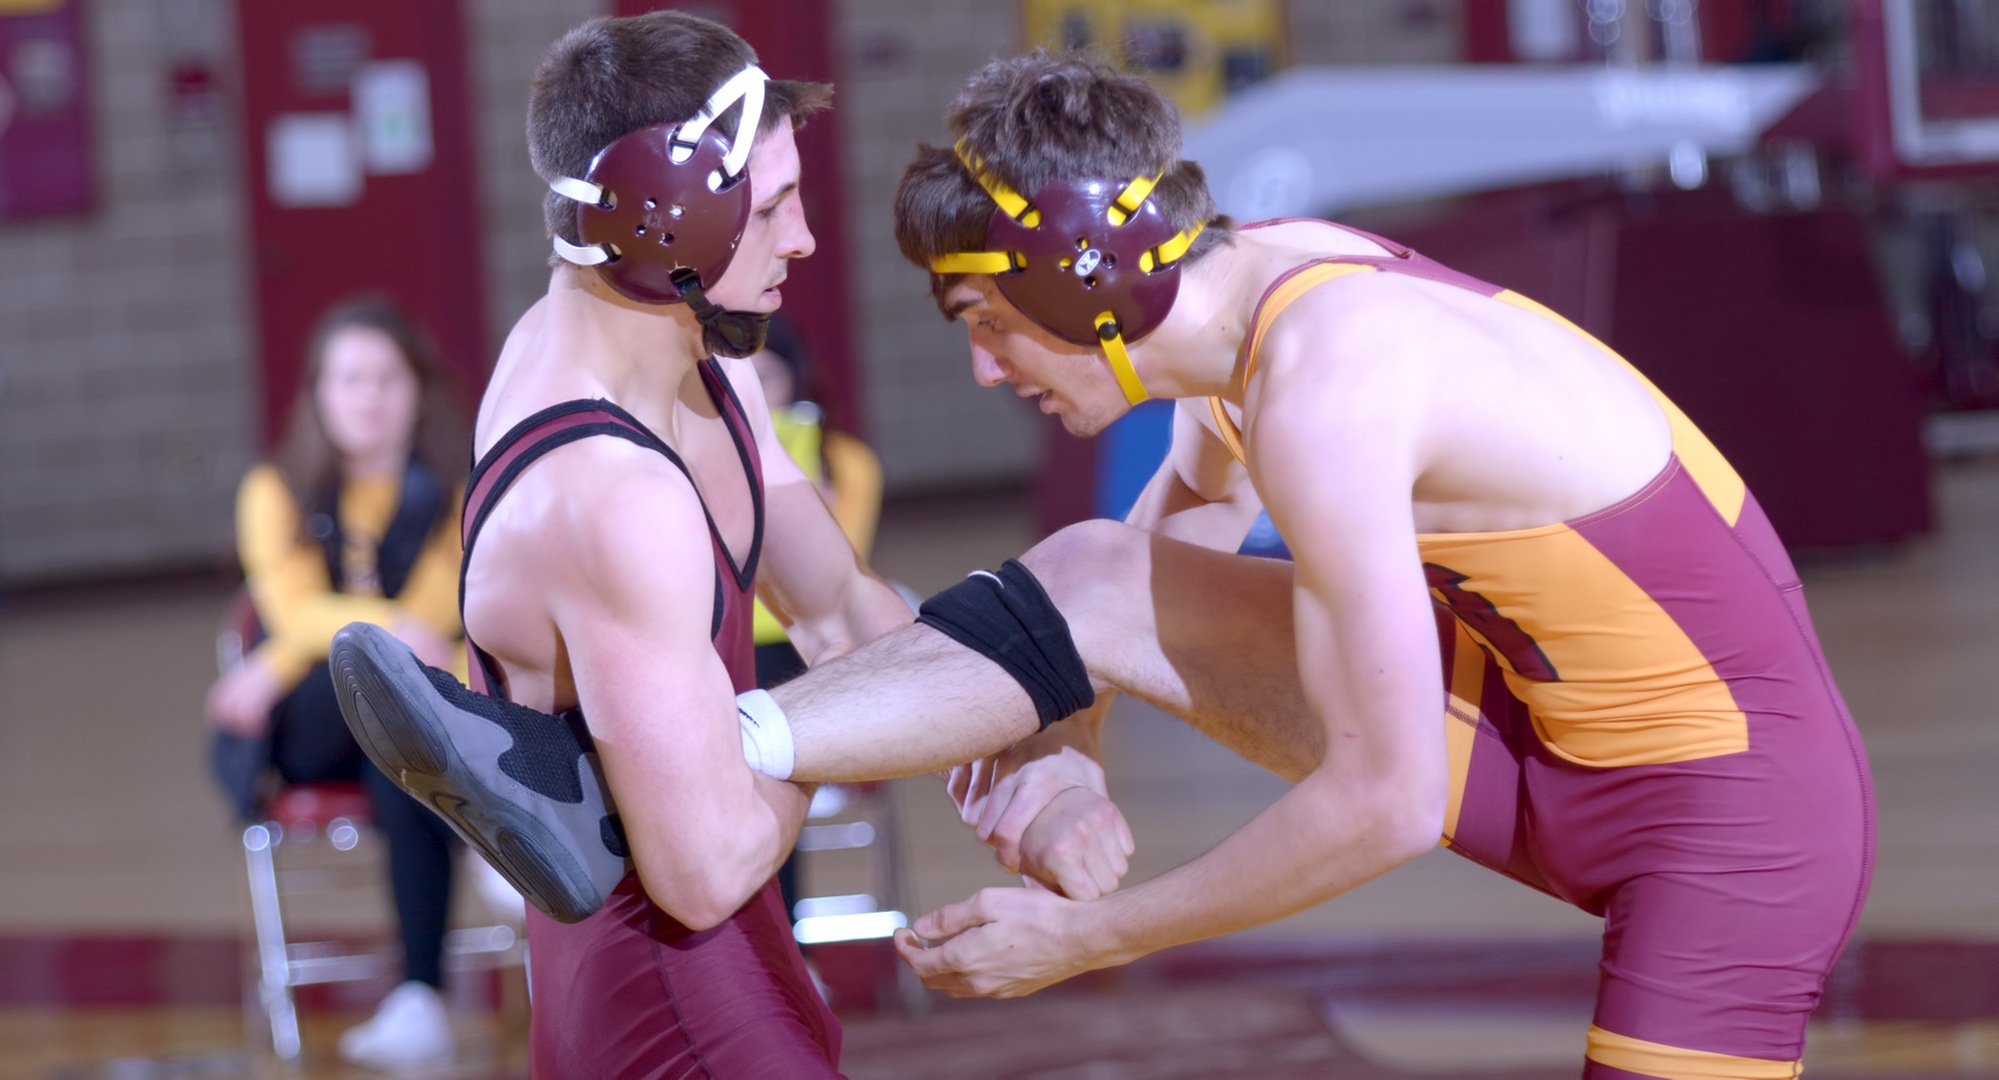 Senior Aaron Dick led the Cobbers with a pair of wins at the Desert Duals. He now leads the team with 11 wins on the year.